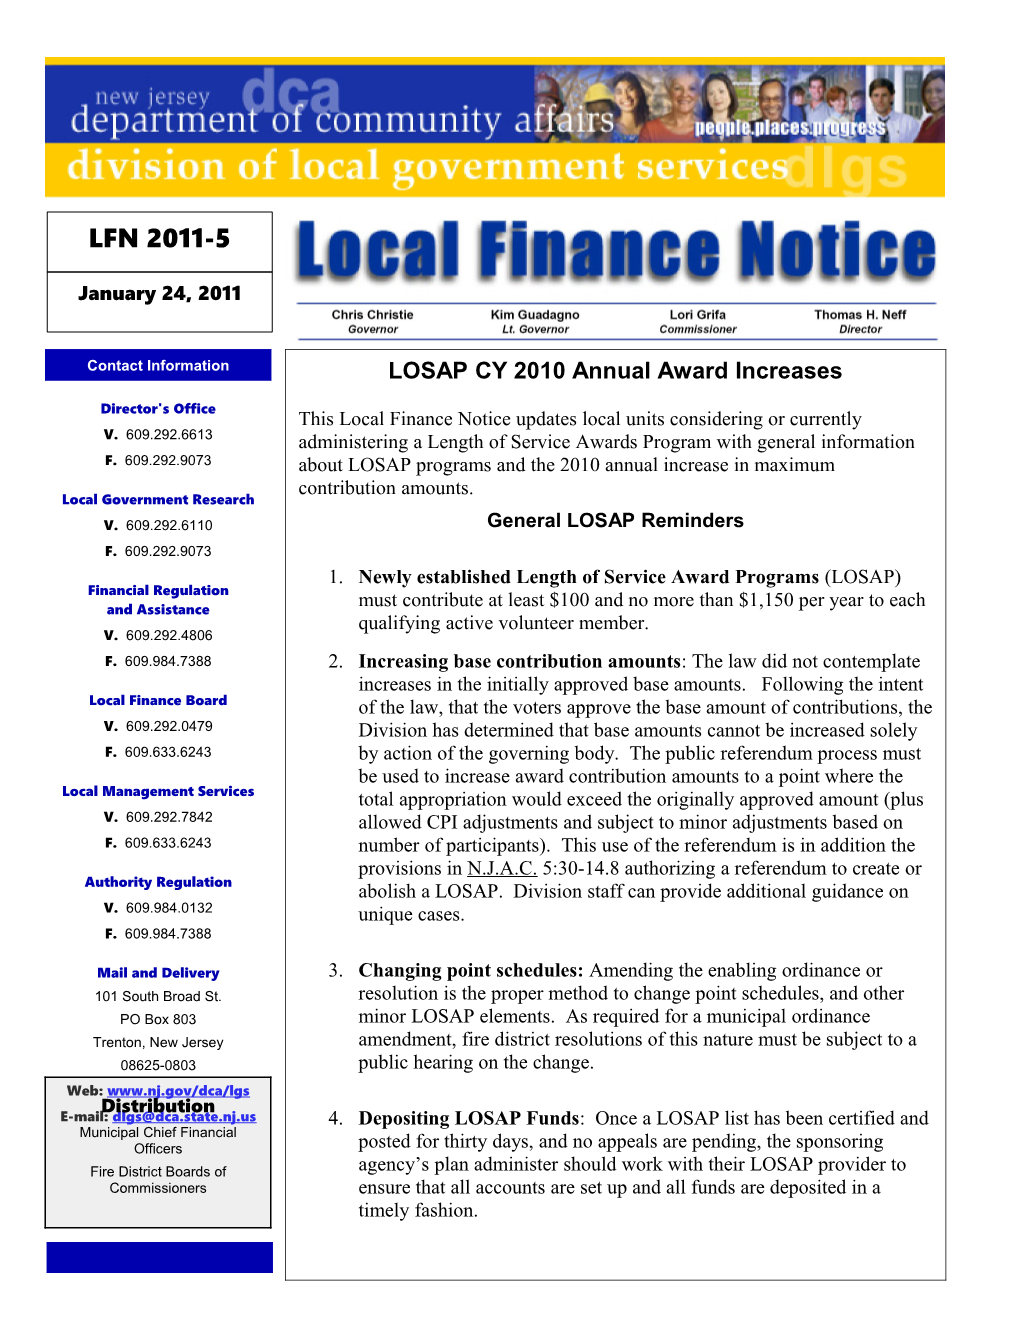 Local Finance Notice 2011-5January 24, 2011Page 1